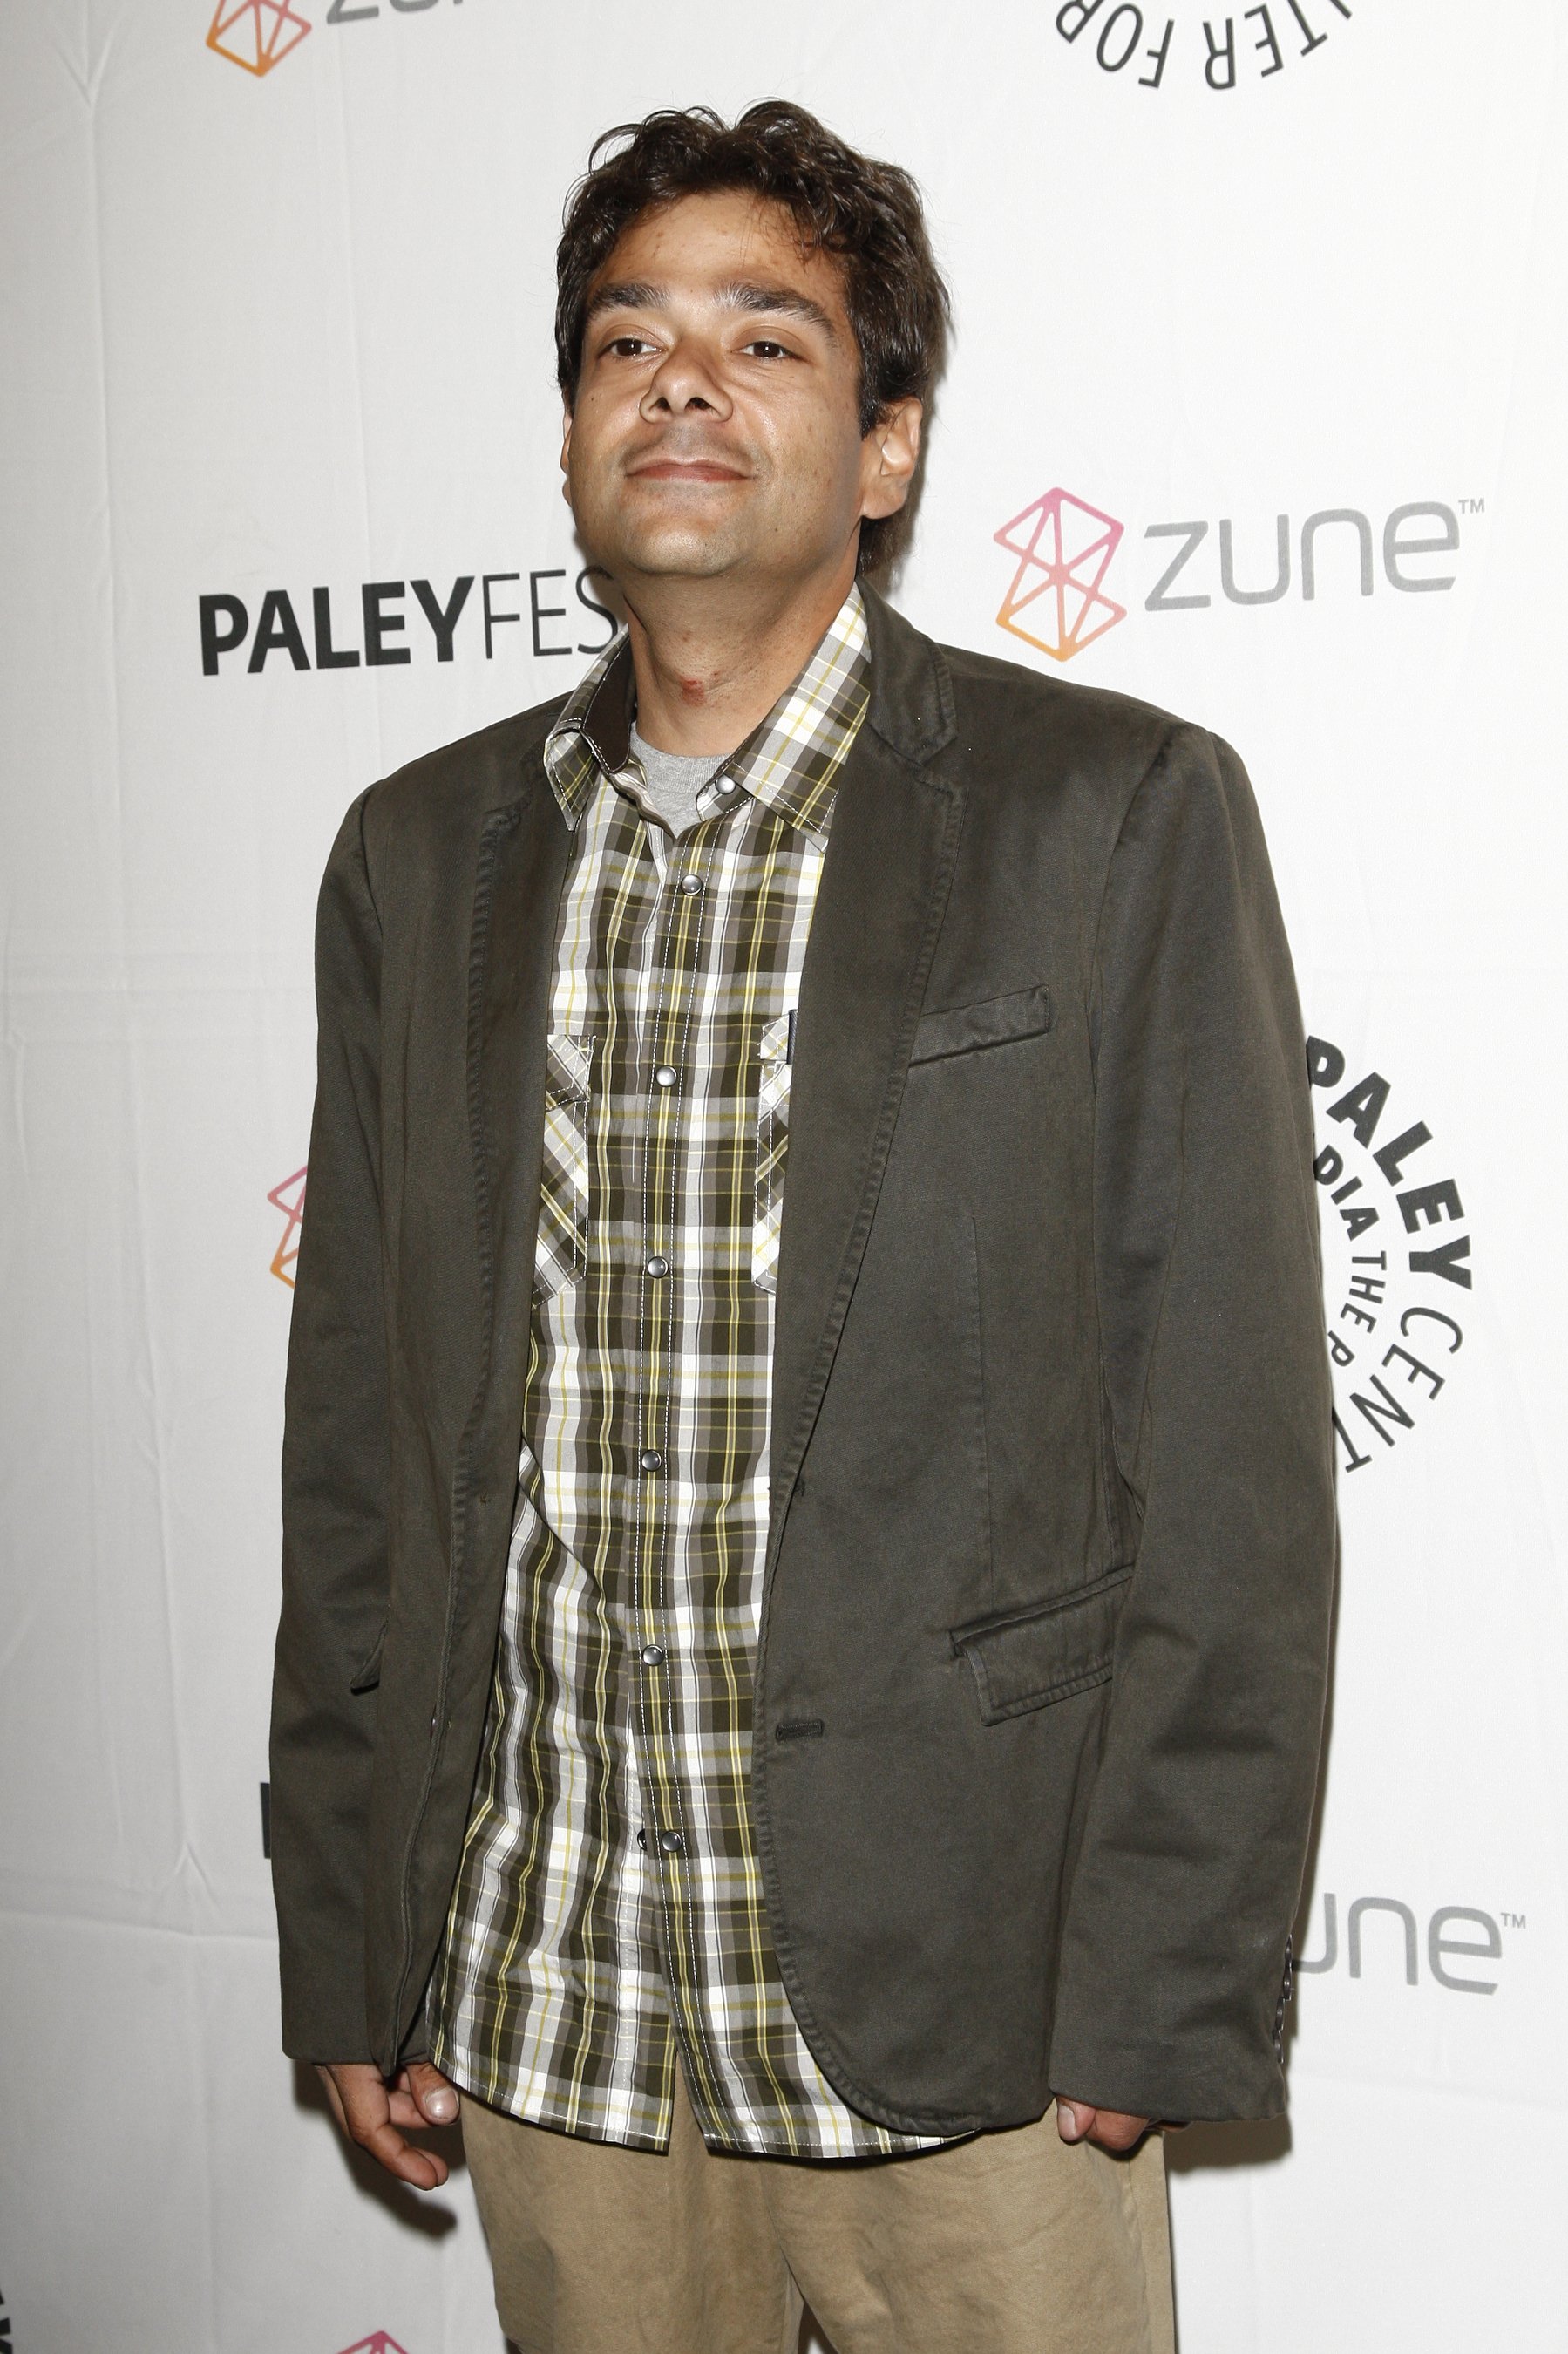 Shaun Weiss arriving at the Paleyfest 2011 on March 12, 2011 in Beverly Hills, California. | Source: Getty Images